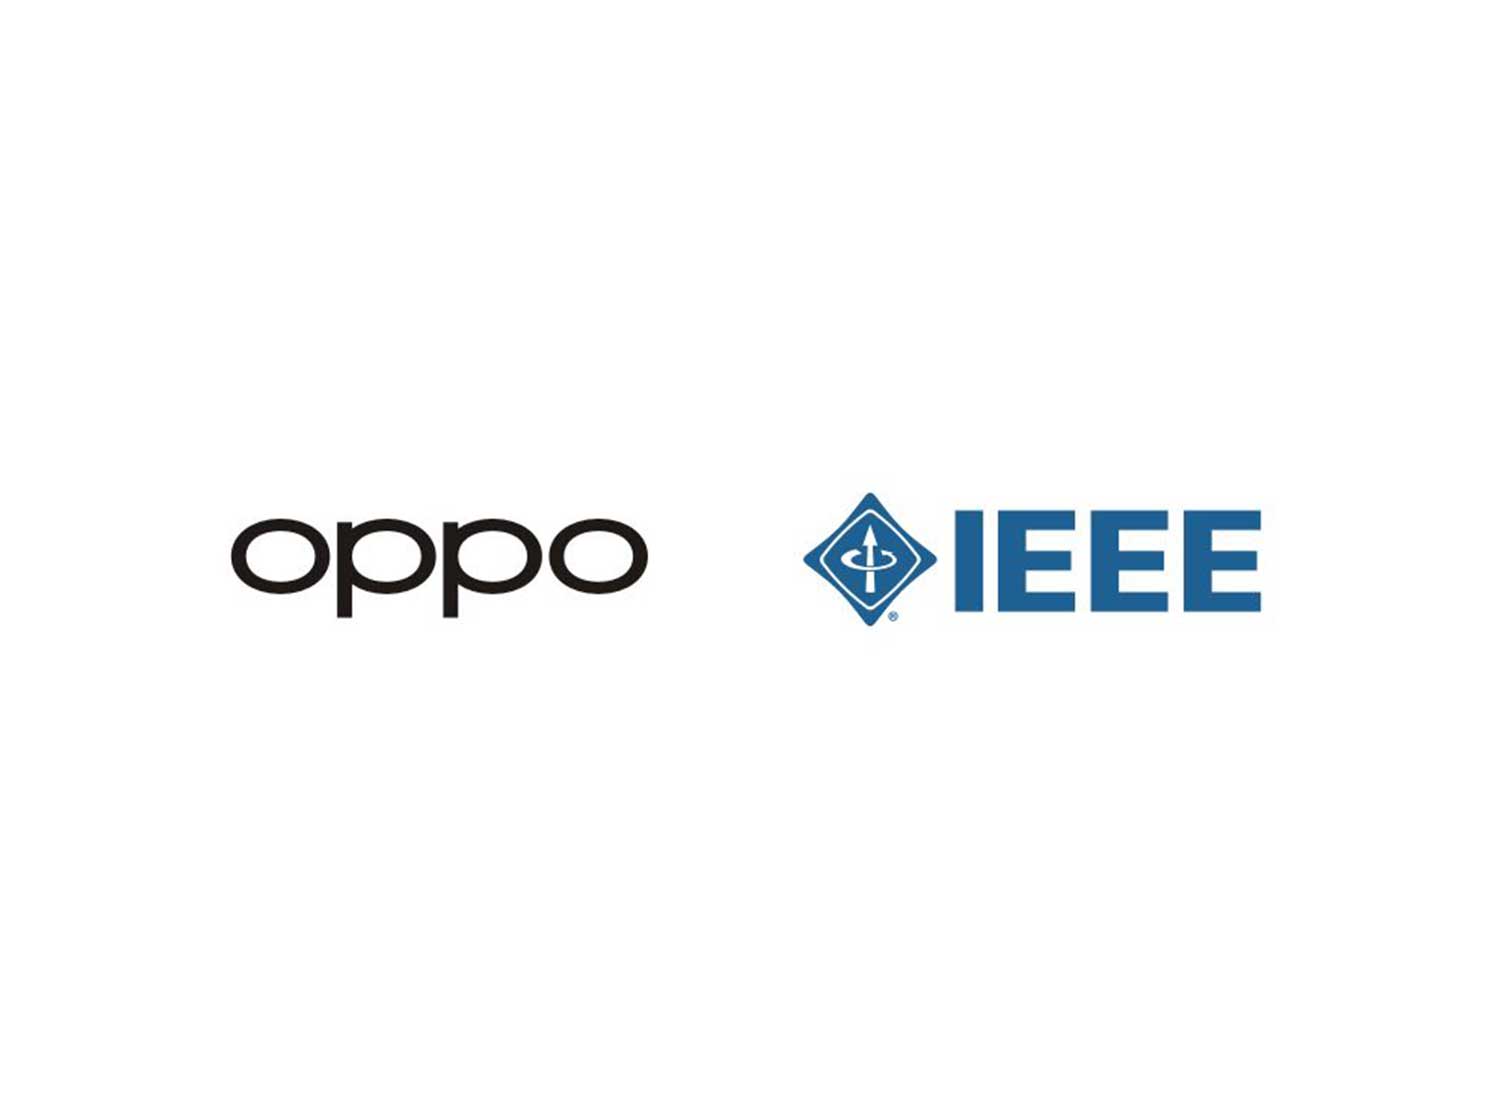 Ieee Circuits And Systems Society, ieee Power Electronics Society, ieee  Sensors Council, international Conference On Robotics And Automation,  european Young Engineers Conference, ieee Robotics And Automation Society,  IEEE Xplore, Institute of Electrical